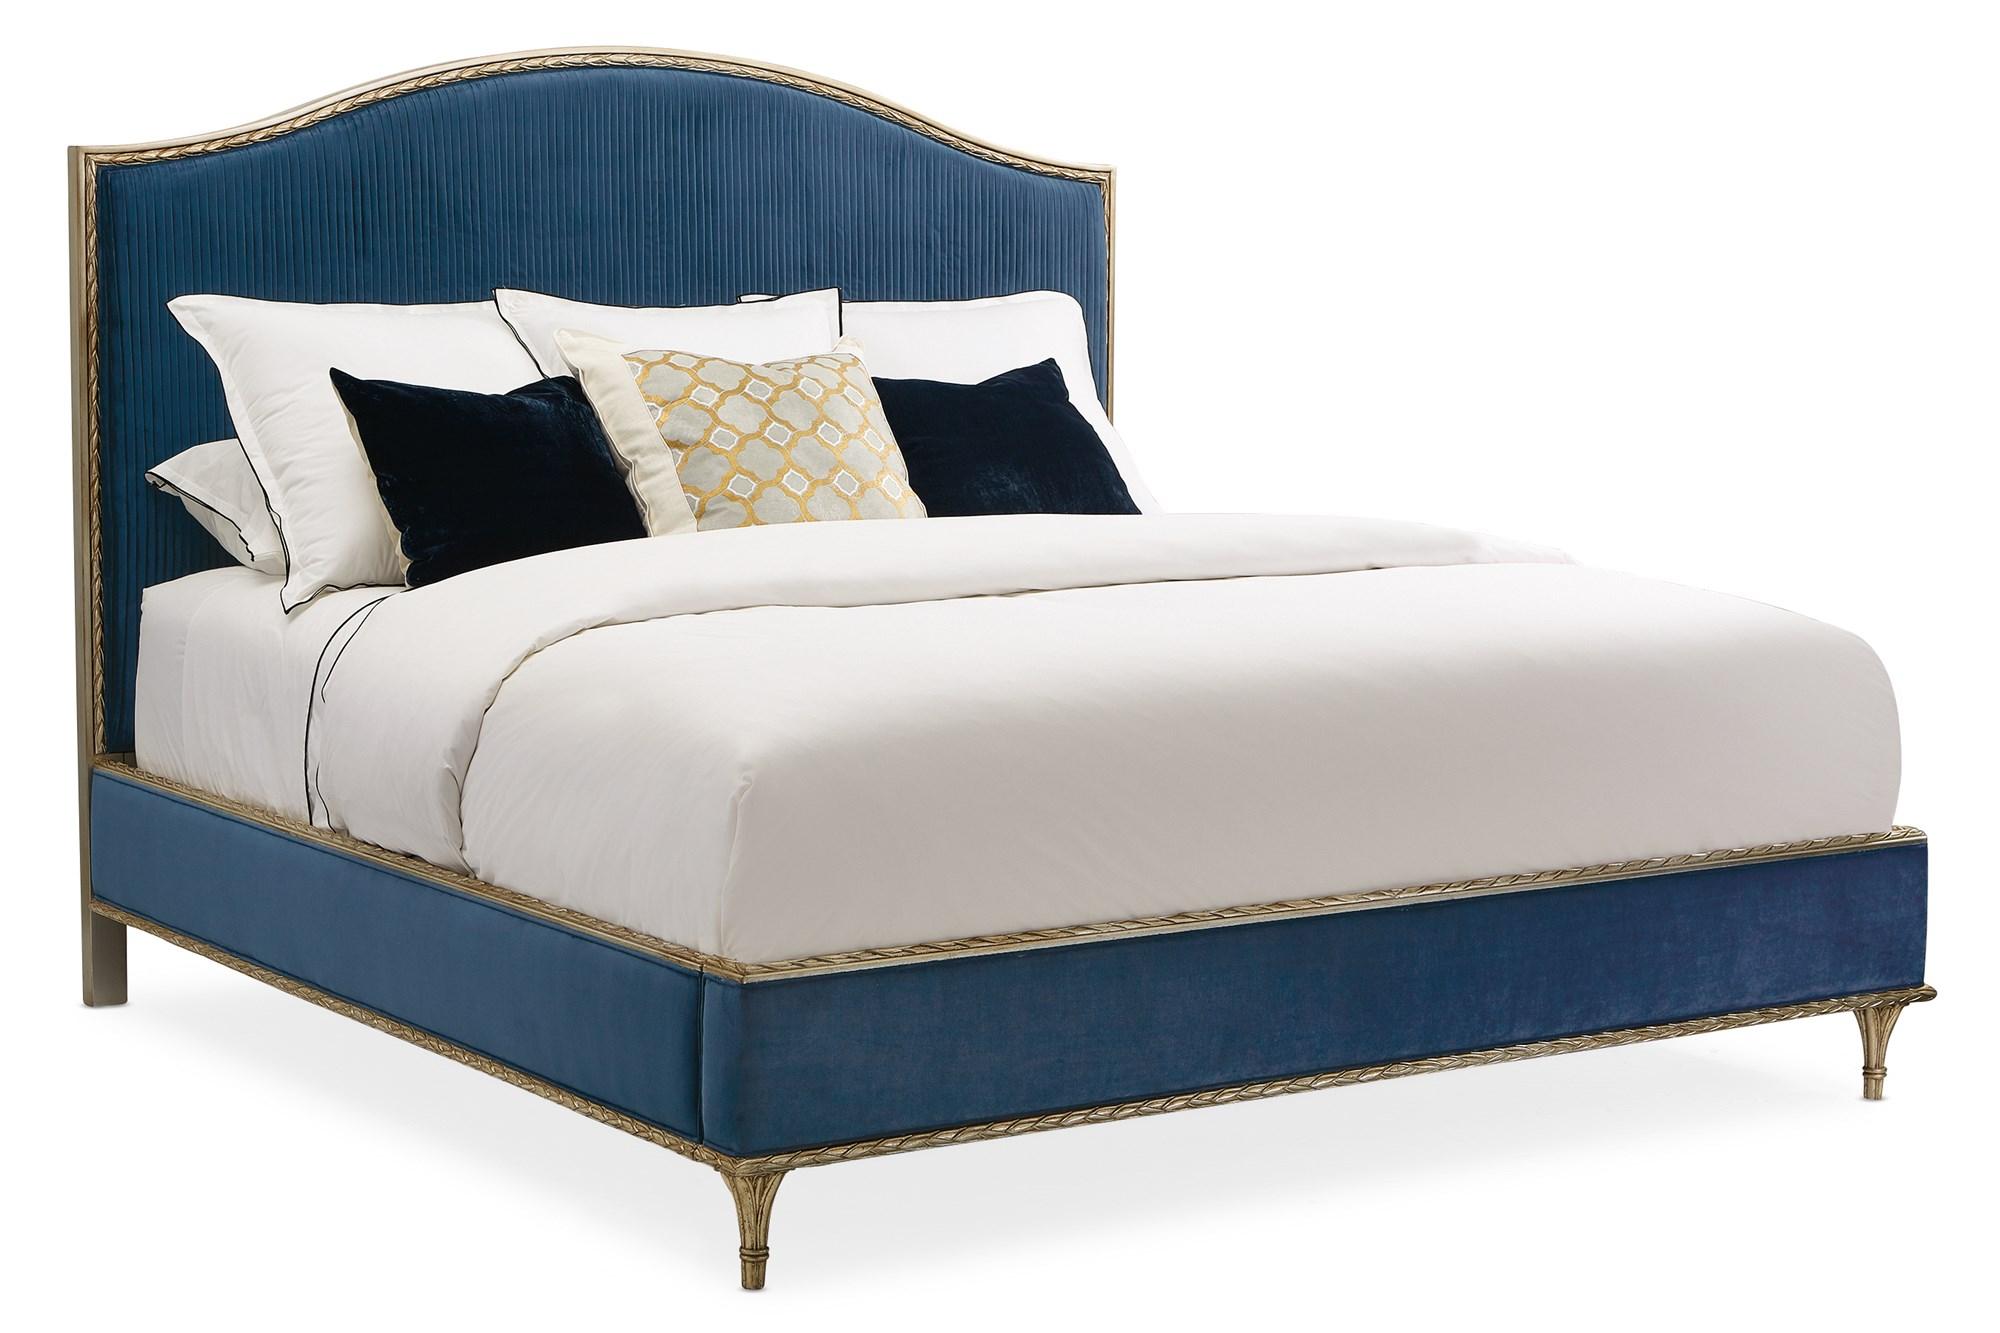 Traditional Platform Bed FONTAINEBLEAU C063-419-142 in Gold, Blue Fabric